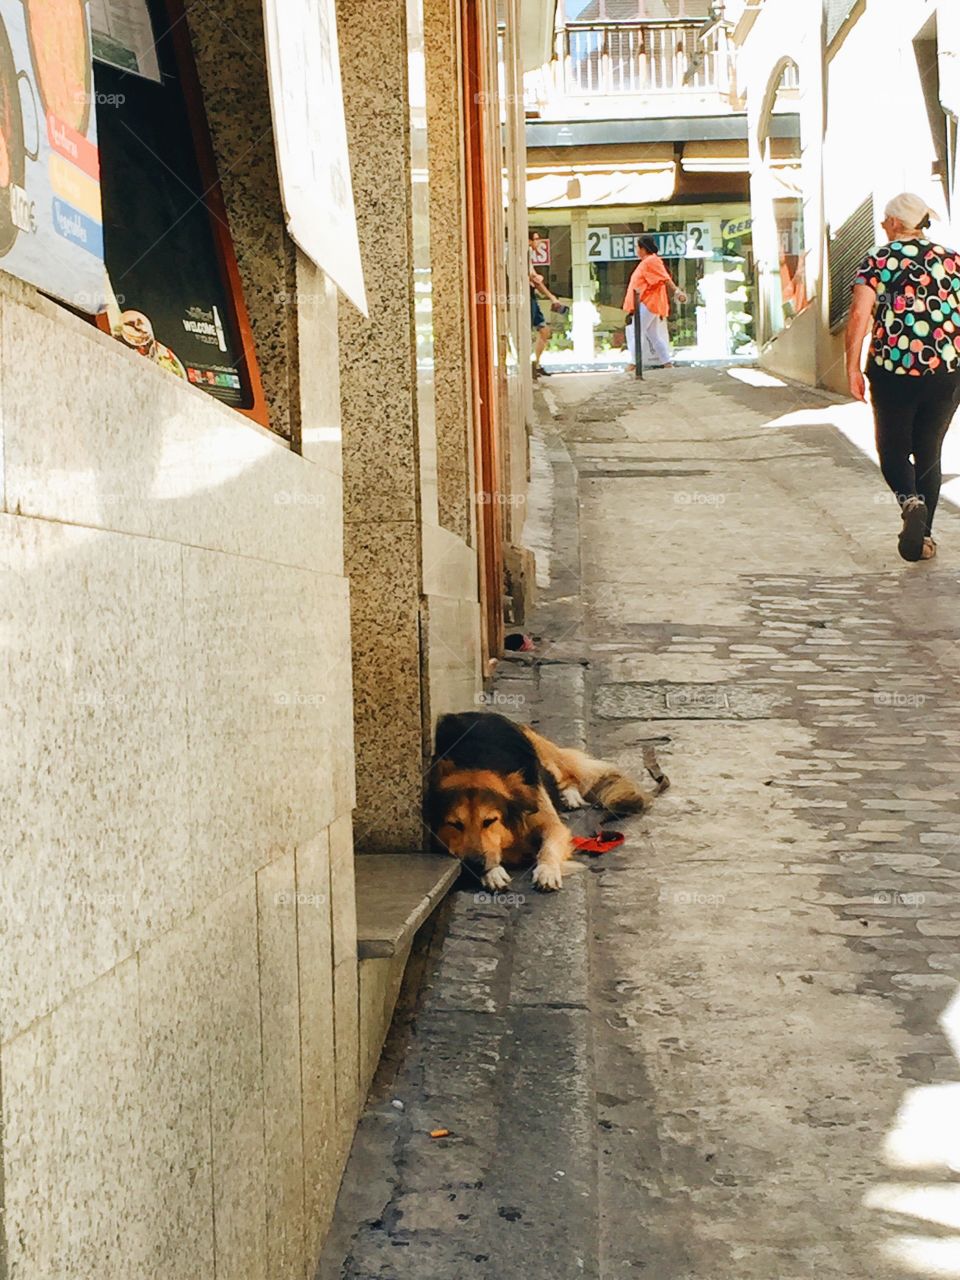 Dog laying on the street